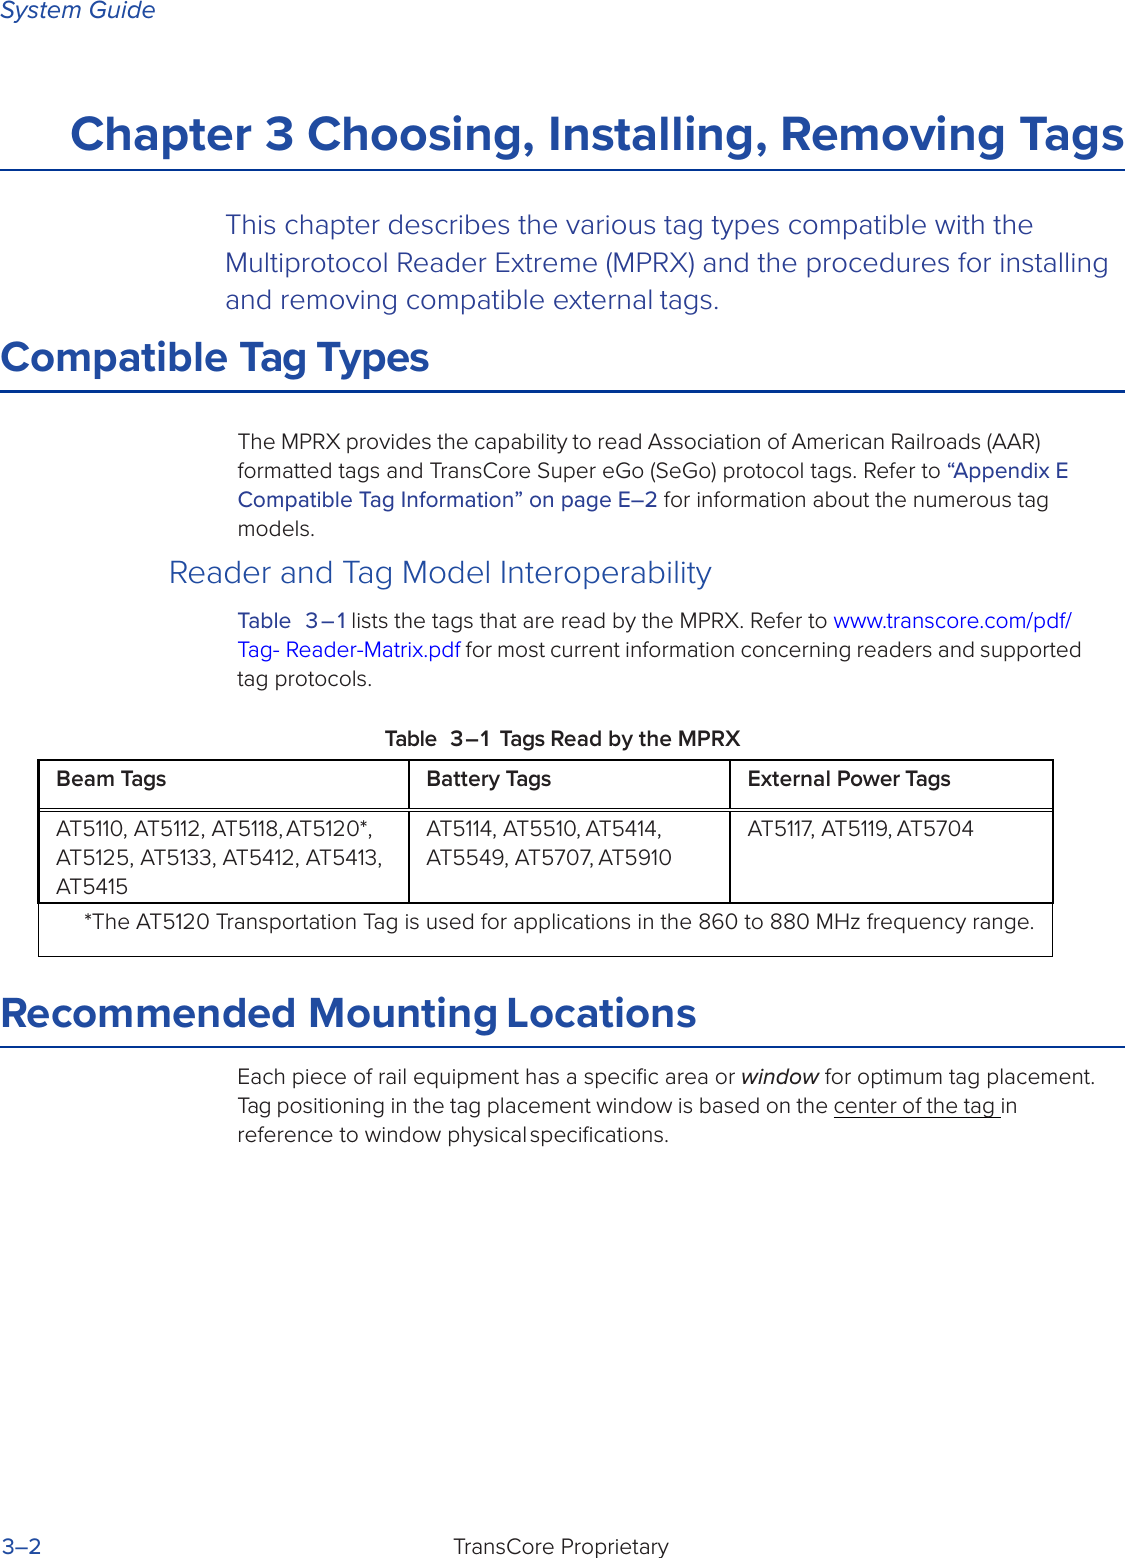 System GuideTransCore Proprietary3–2Chapter 3 Choosing, Installing, Removing TagsThis chapter describes the various tag types compatible with the Multiprotocol Reader Extreme (MPRX) and the procedures for installing and removing compatible external tags.Compatible Tag TypesThe MPRX provides the capability to read Association of American Railroads (AAR) formatted tags and TransCore Super eGo (SeGo) protocol tags. Refer to “Appendix E  Compatible Tag Information” on page E–2 for information about the numerous tag models.Reader and Tag Model InteroperabilityTable 3 – 1 lists the tags that are read by the MPRX. Refer to www.transcore.com/pdf/Tag- Reader-Matrix.pdf for most current information concerning readers and supported tag protocols.Table 3 – 1 Tags Read by the MPRXRecommended Mounting LocationsEach piece of rail equipment has a speciﬁc area or window for optimum tag placement. Tag positioning in the tag placement window is based on the center of the tag in reference to window physical speciﬁcations.Beam Tags Battery Tags External Power TagsAT5110, AT5112, AT5118, AT5120*, AT5125, AT5133, AT5412, AT5413, AT5415AT5114, AT5510, AT5414, AT5549, AT5707, AT5910AT5117, AT5119, AT5704*The AT5120 Transportation Tag is used for applications in the 860 to 880 MHz frequency range.